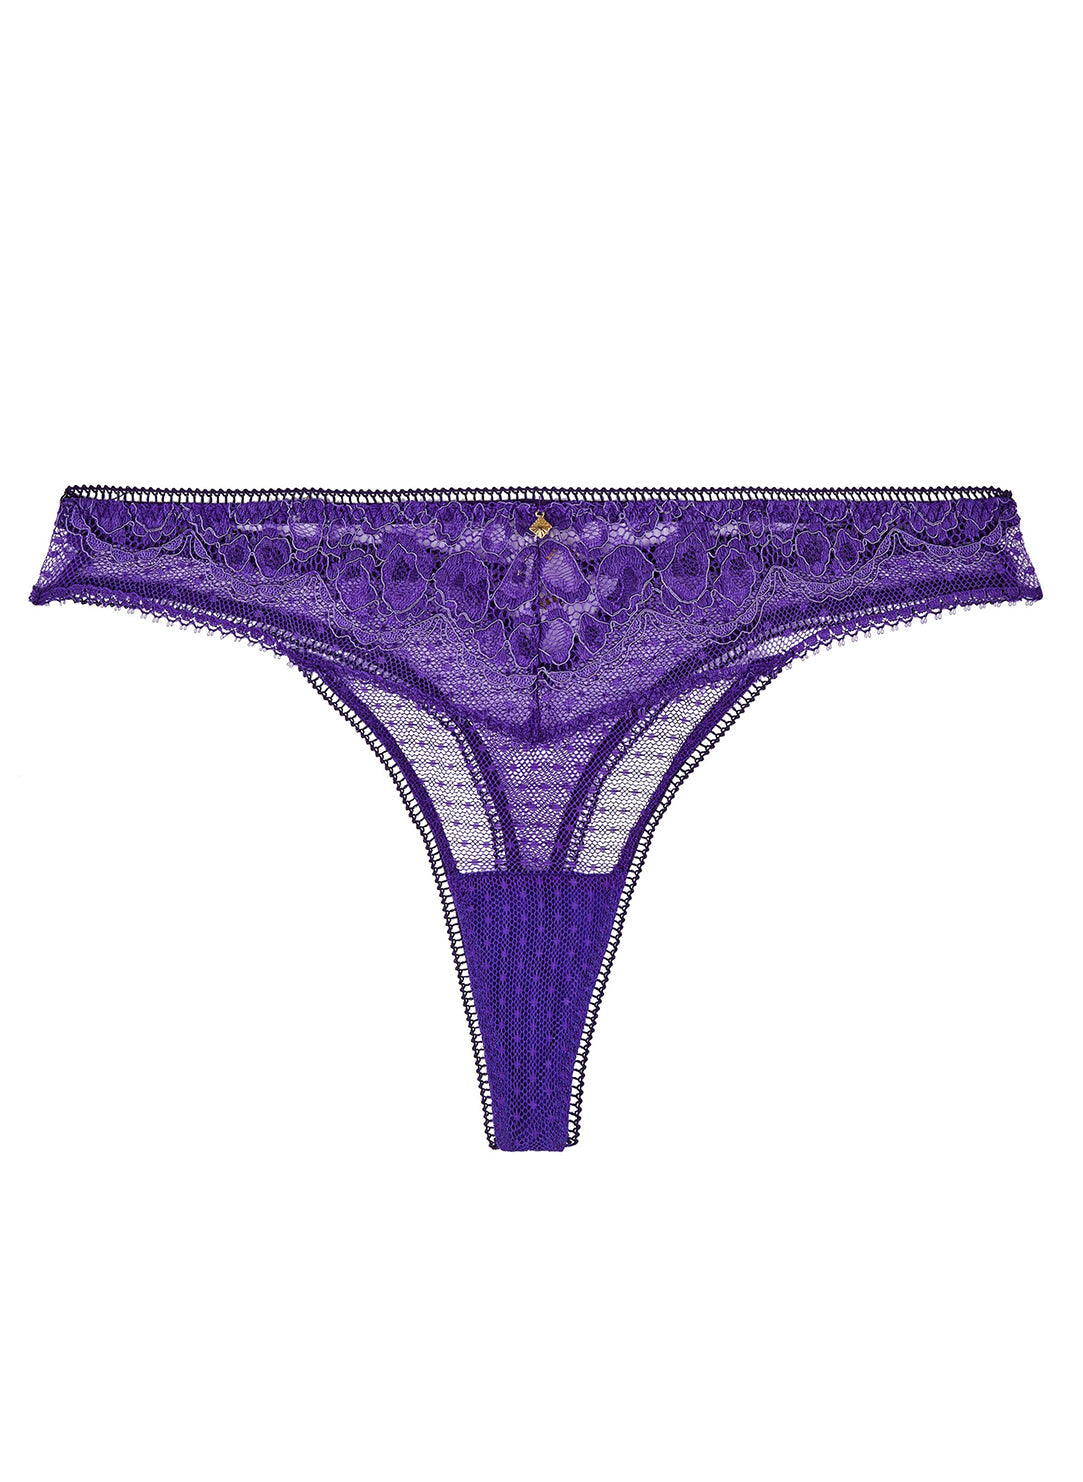 Aubade Illusion Fauve Thong in Violet